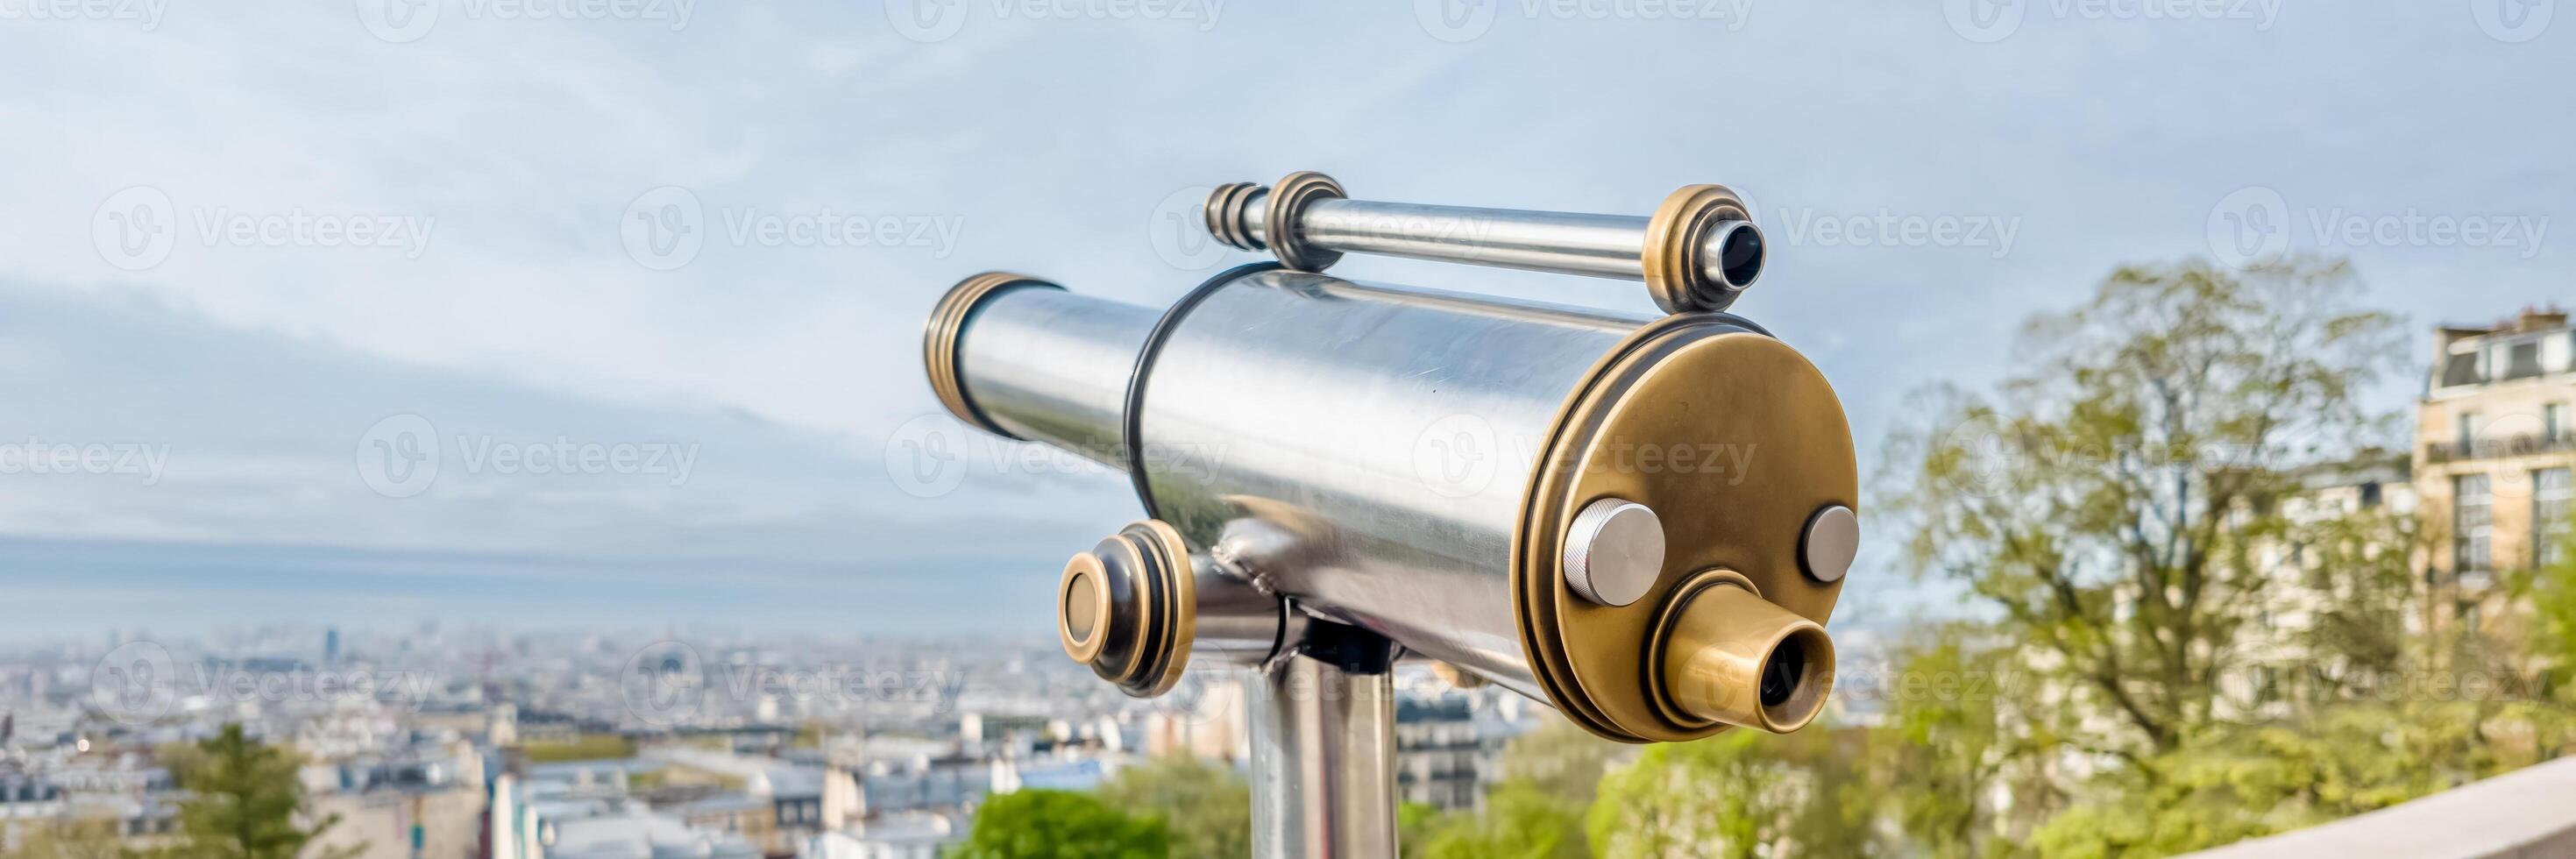 Vintage looking public telescope with expansive city view from high vantage point, ideal for urban exploration and travel themes Related concepts, tourism, sightseeing photo